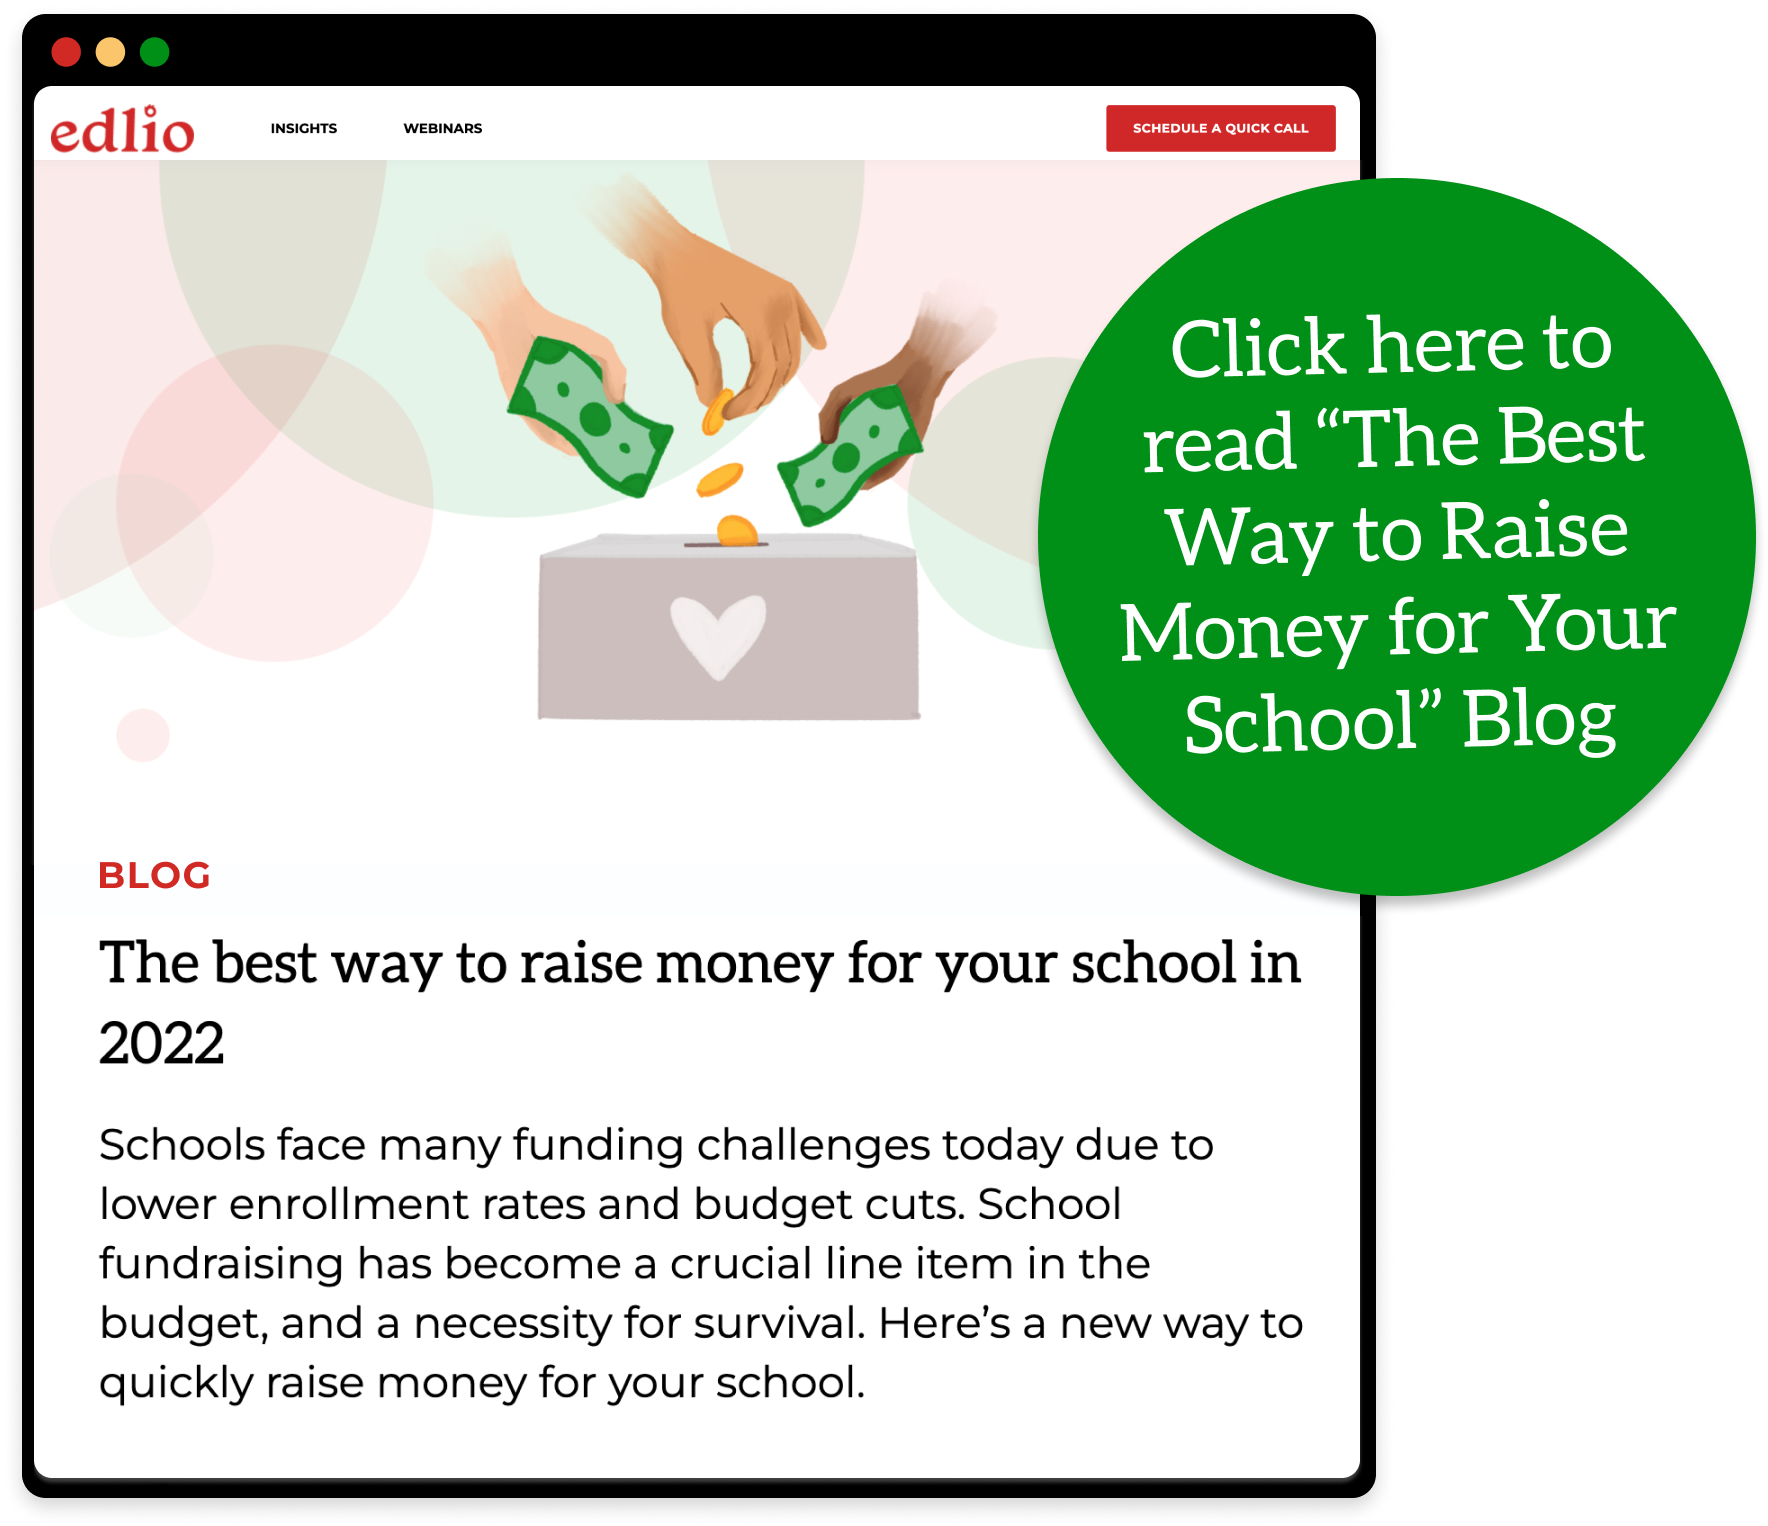 Click here to read “The Best Way to Raise Money for Your School” Blog